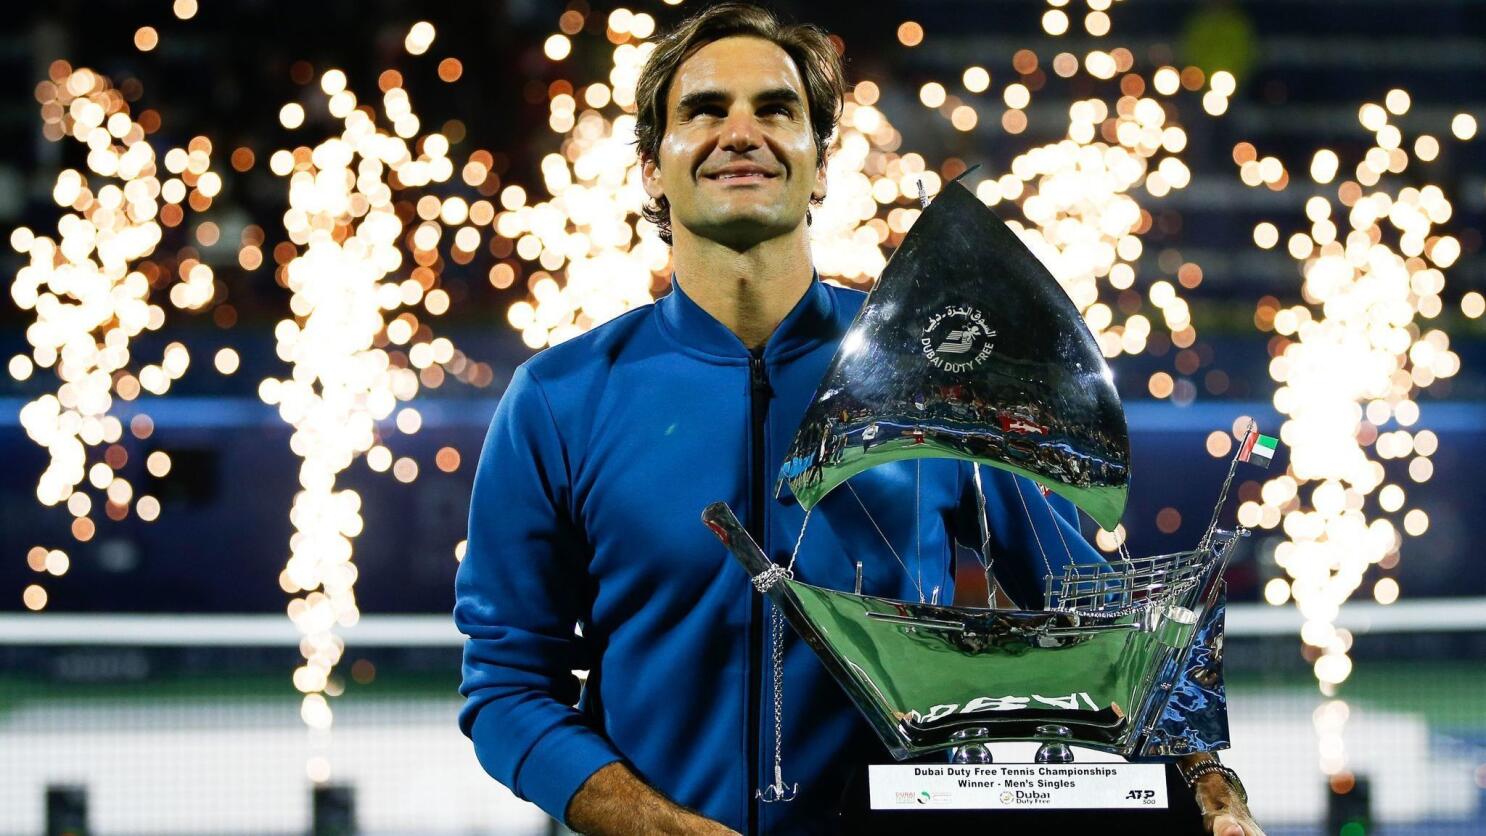 Roger Federer adds Dubai to his 2021 comeback tournament schedule